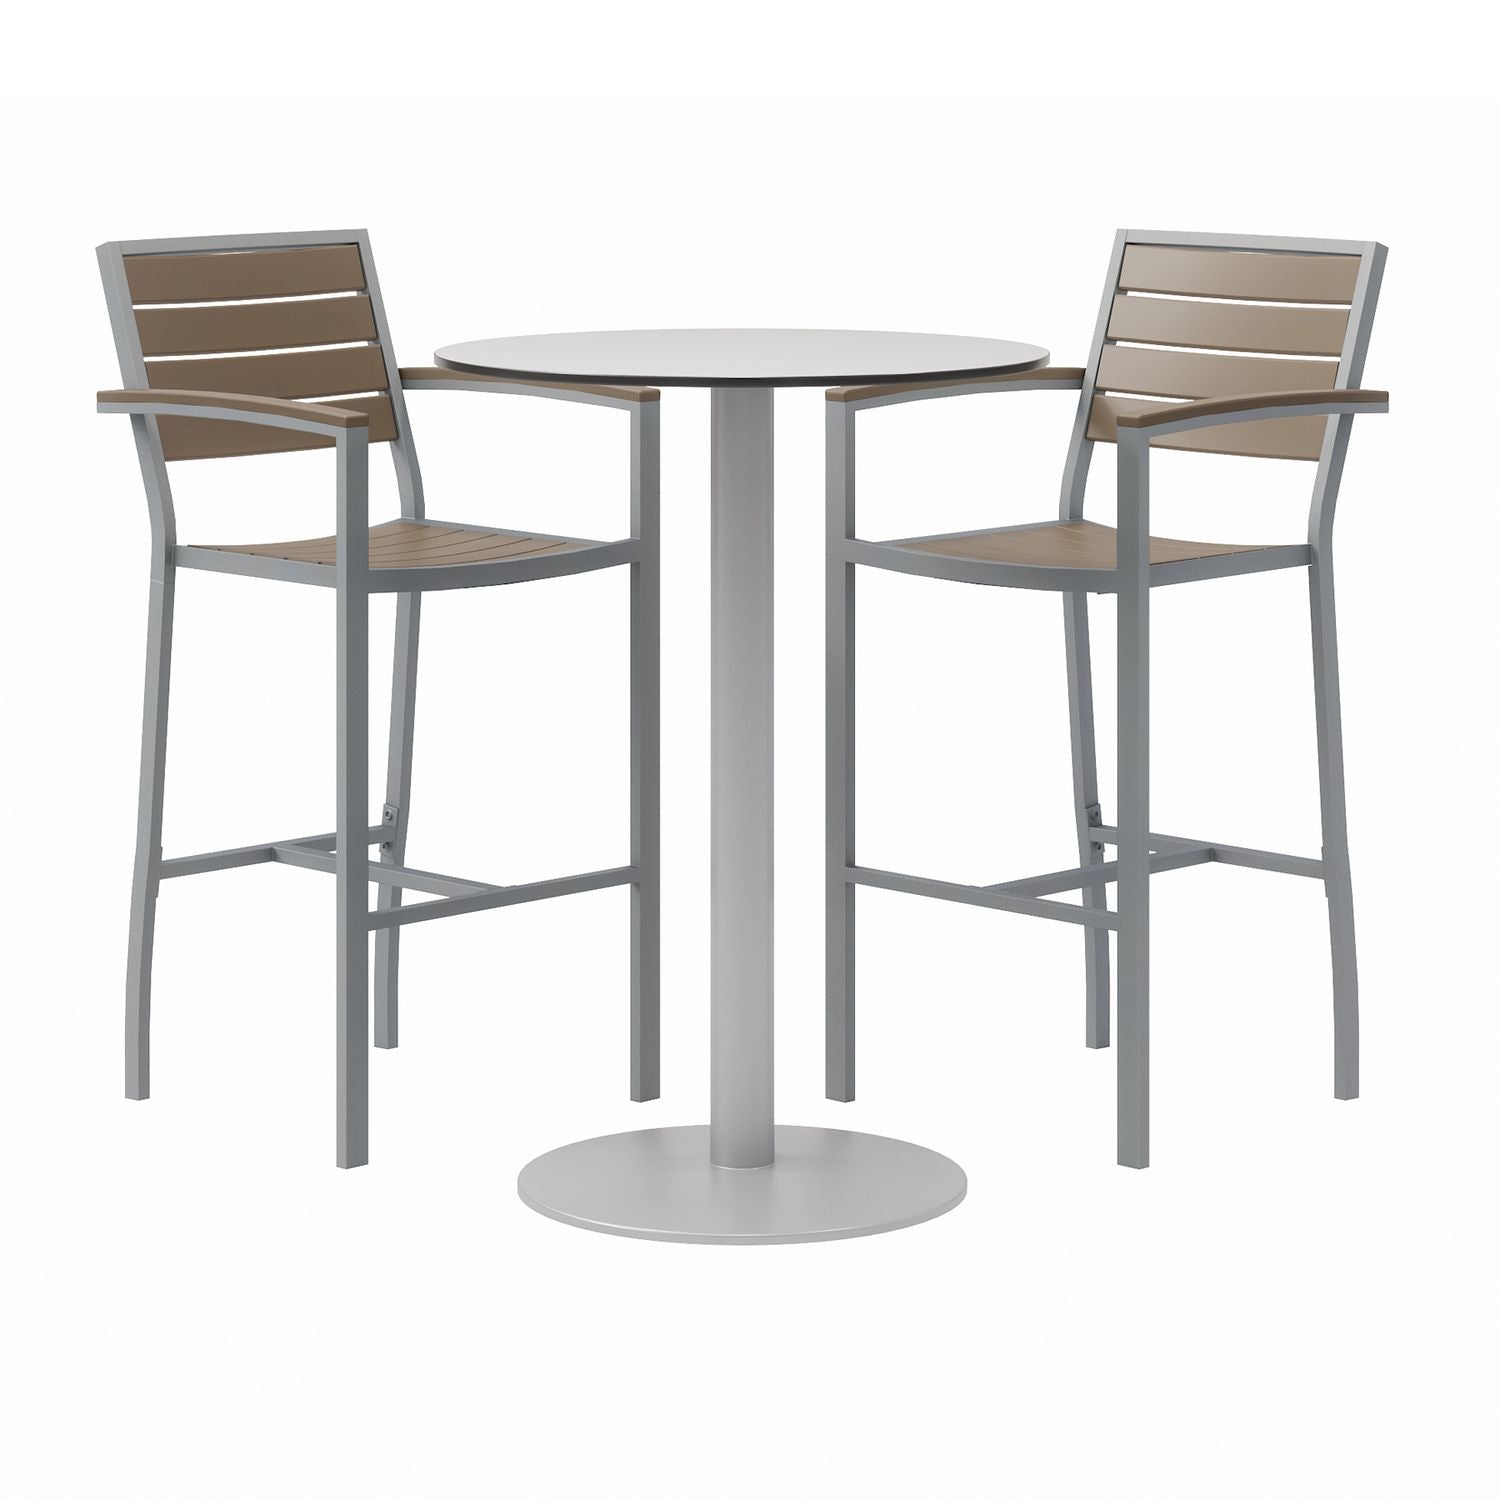 eveleen-outdoor-bistro-patio-table-2-mocha-powder-coated-polymer-barstools-round-30-dia-x-41h-grayships-in-4-6-bus-days_kfi840031918468 - 1